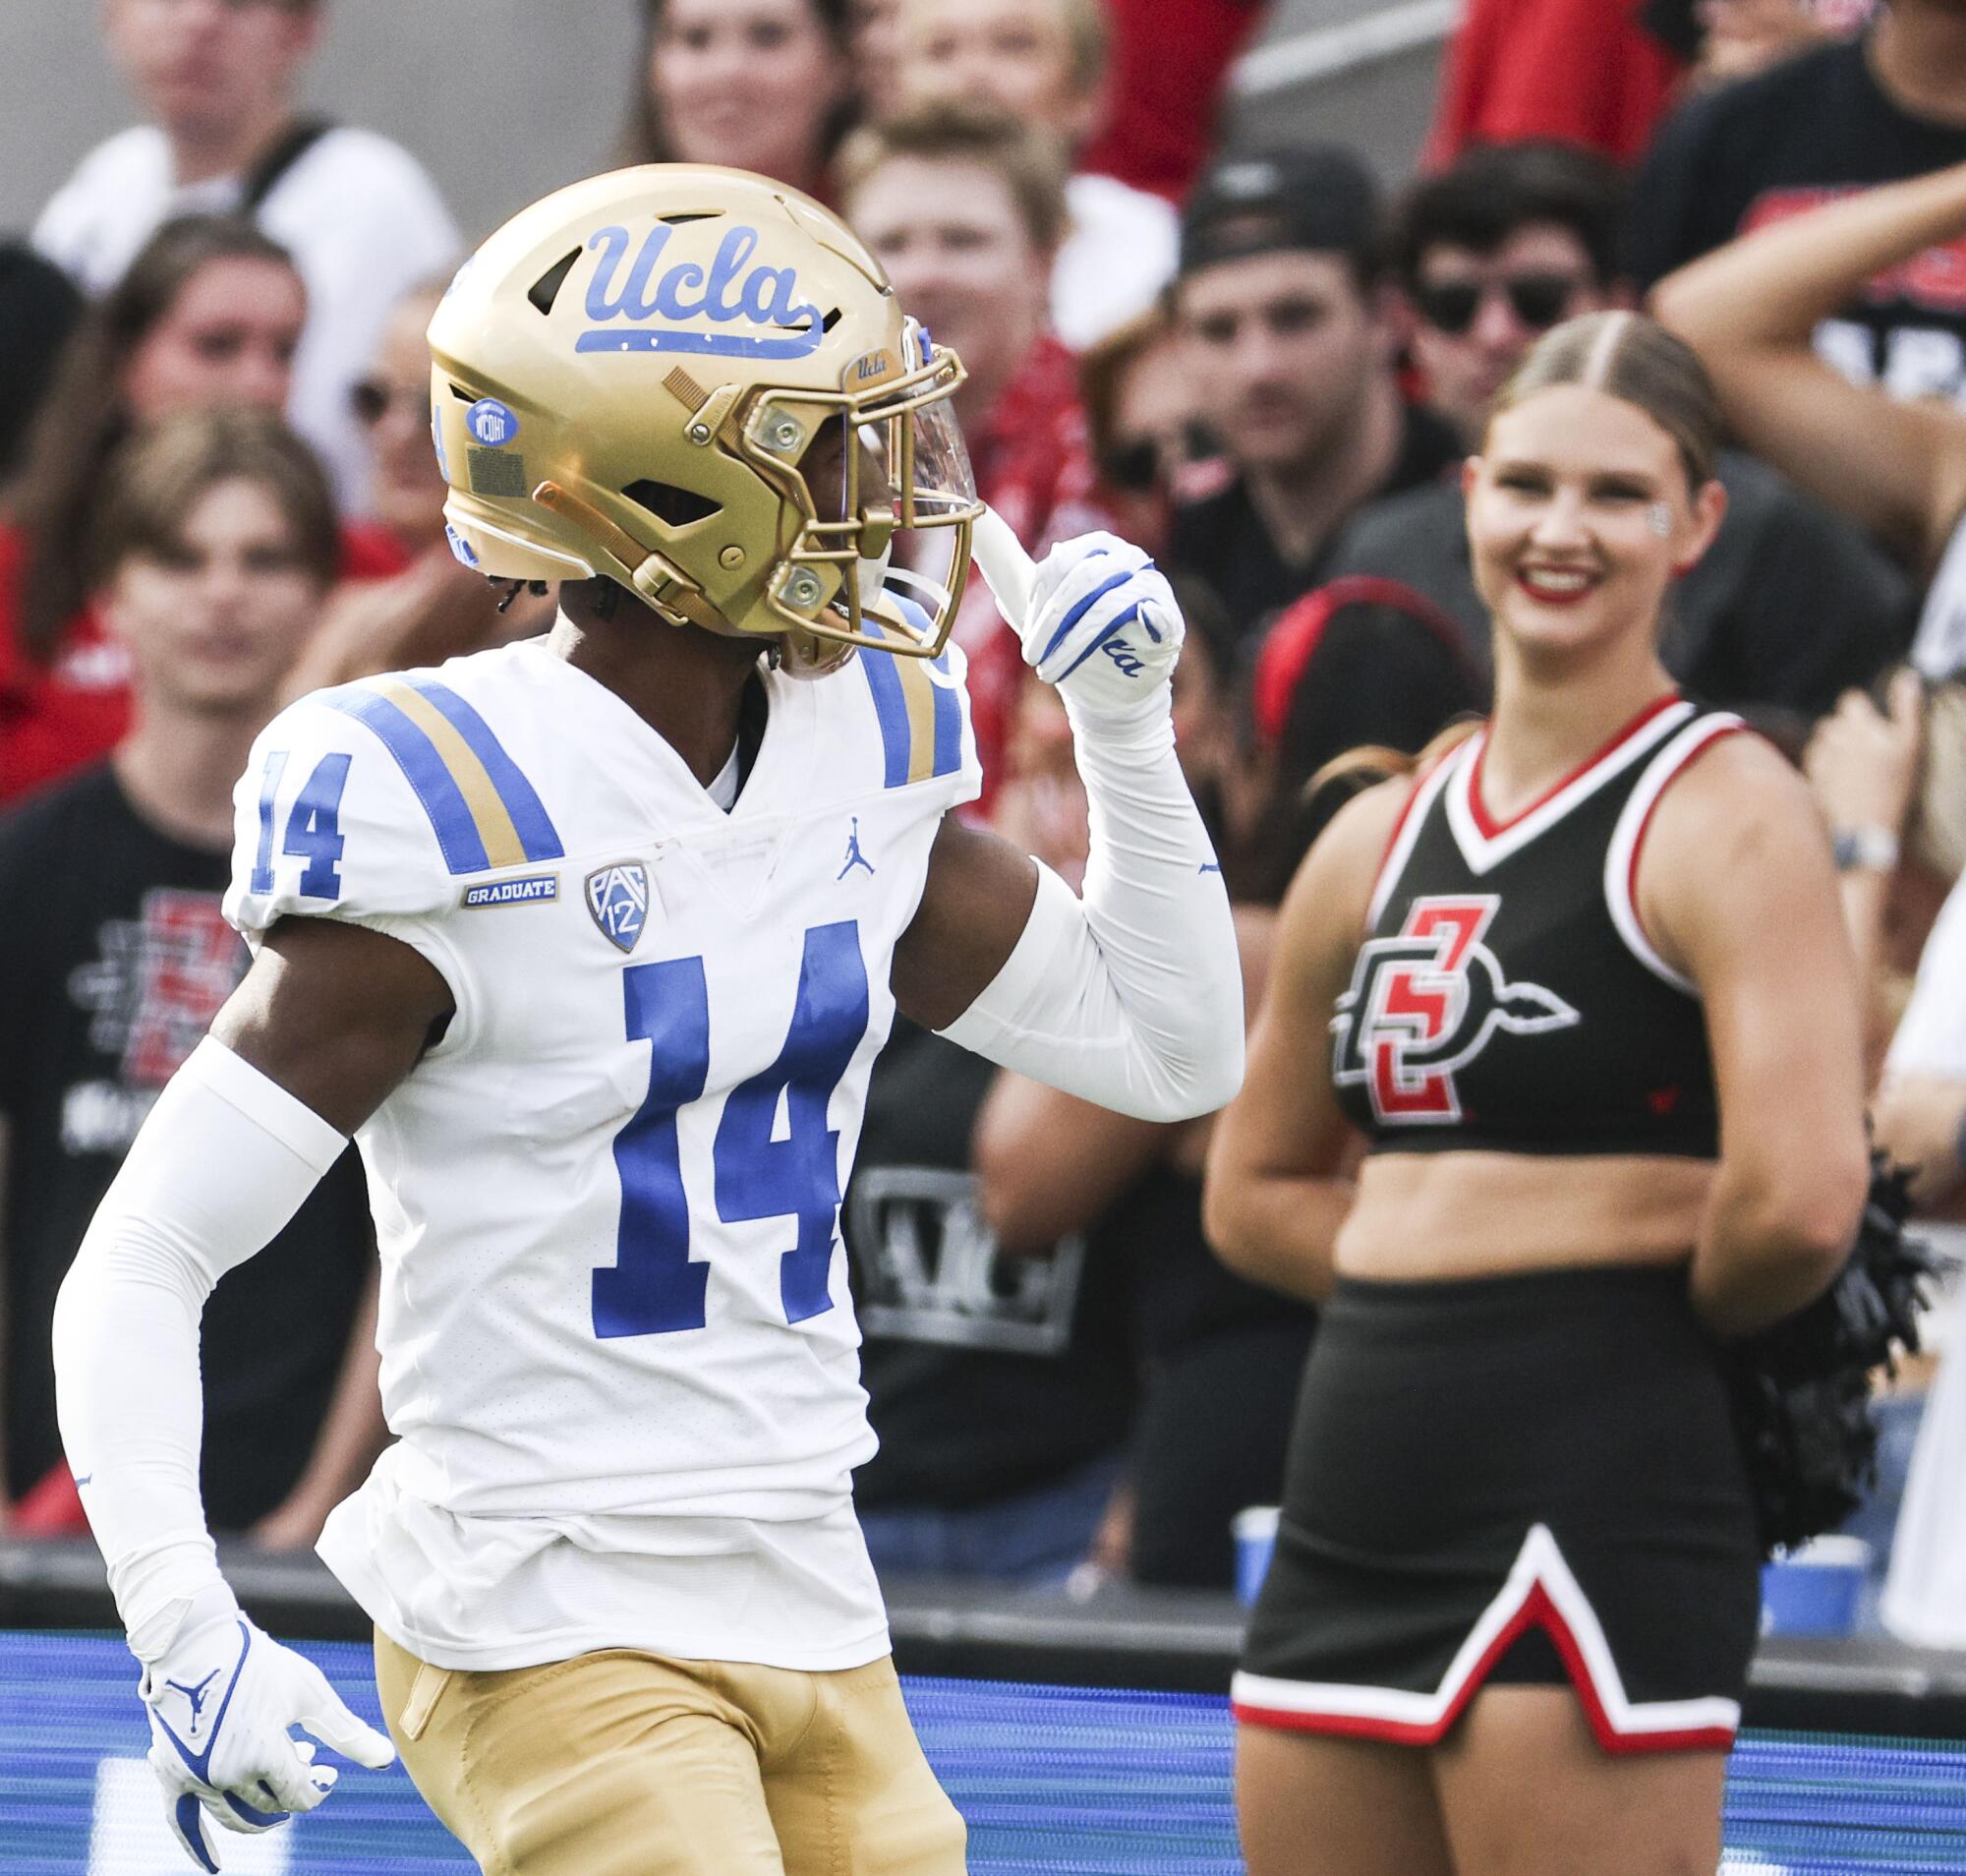 UCLA wide receiver Josiah Norwood gestures after scoring a touchdown against San Diego State last week.